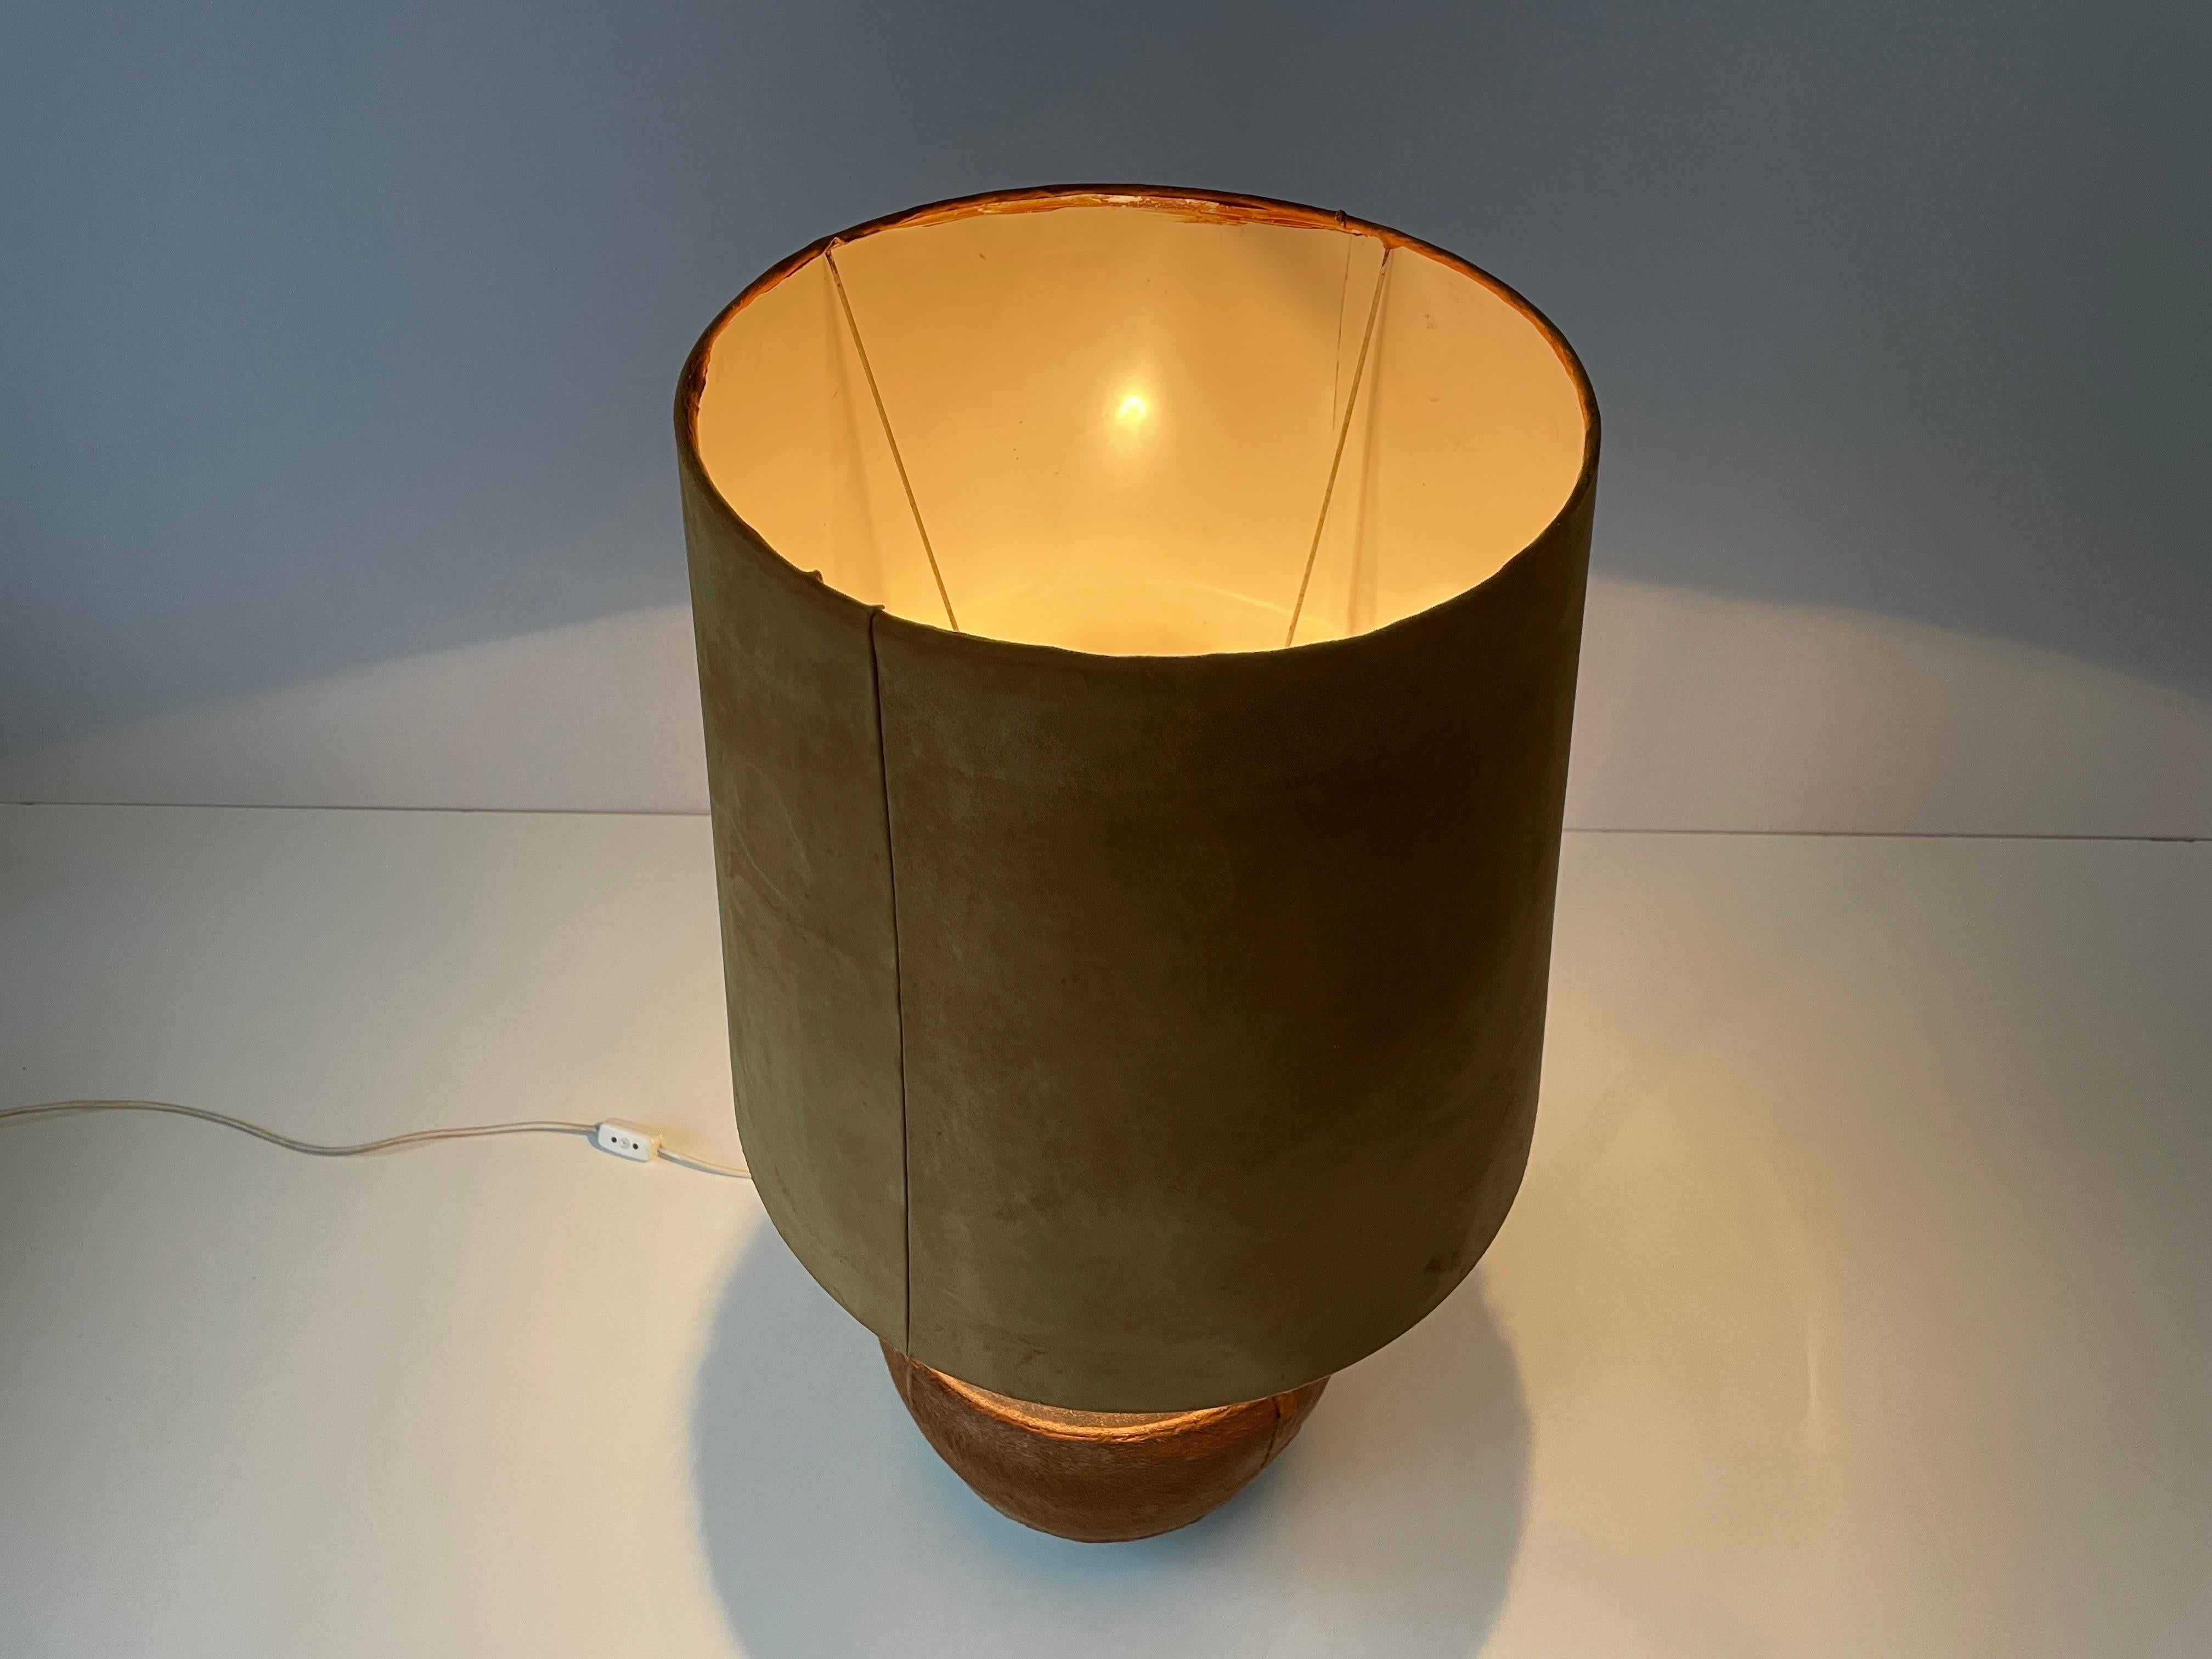 Tan Suede Leather and Glass Shade Floor or Table Lamp, 1960s, Denmark For Sale 8